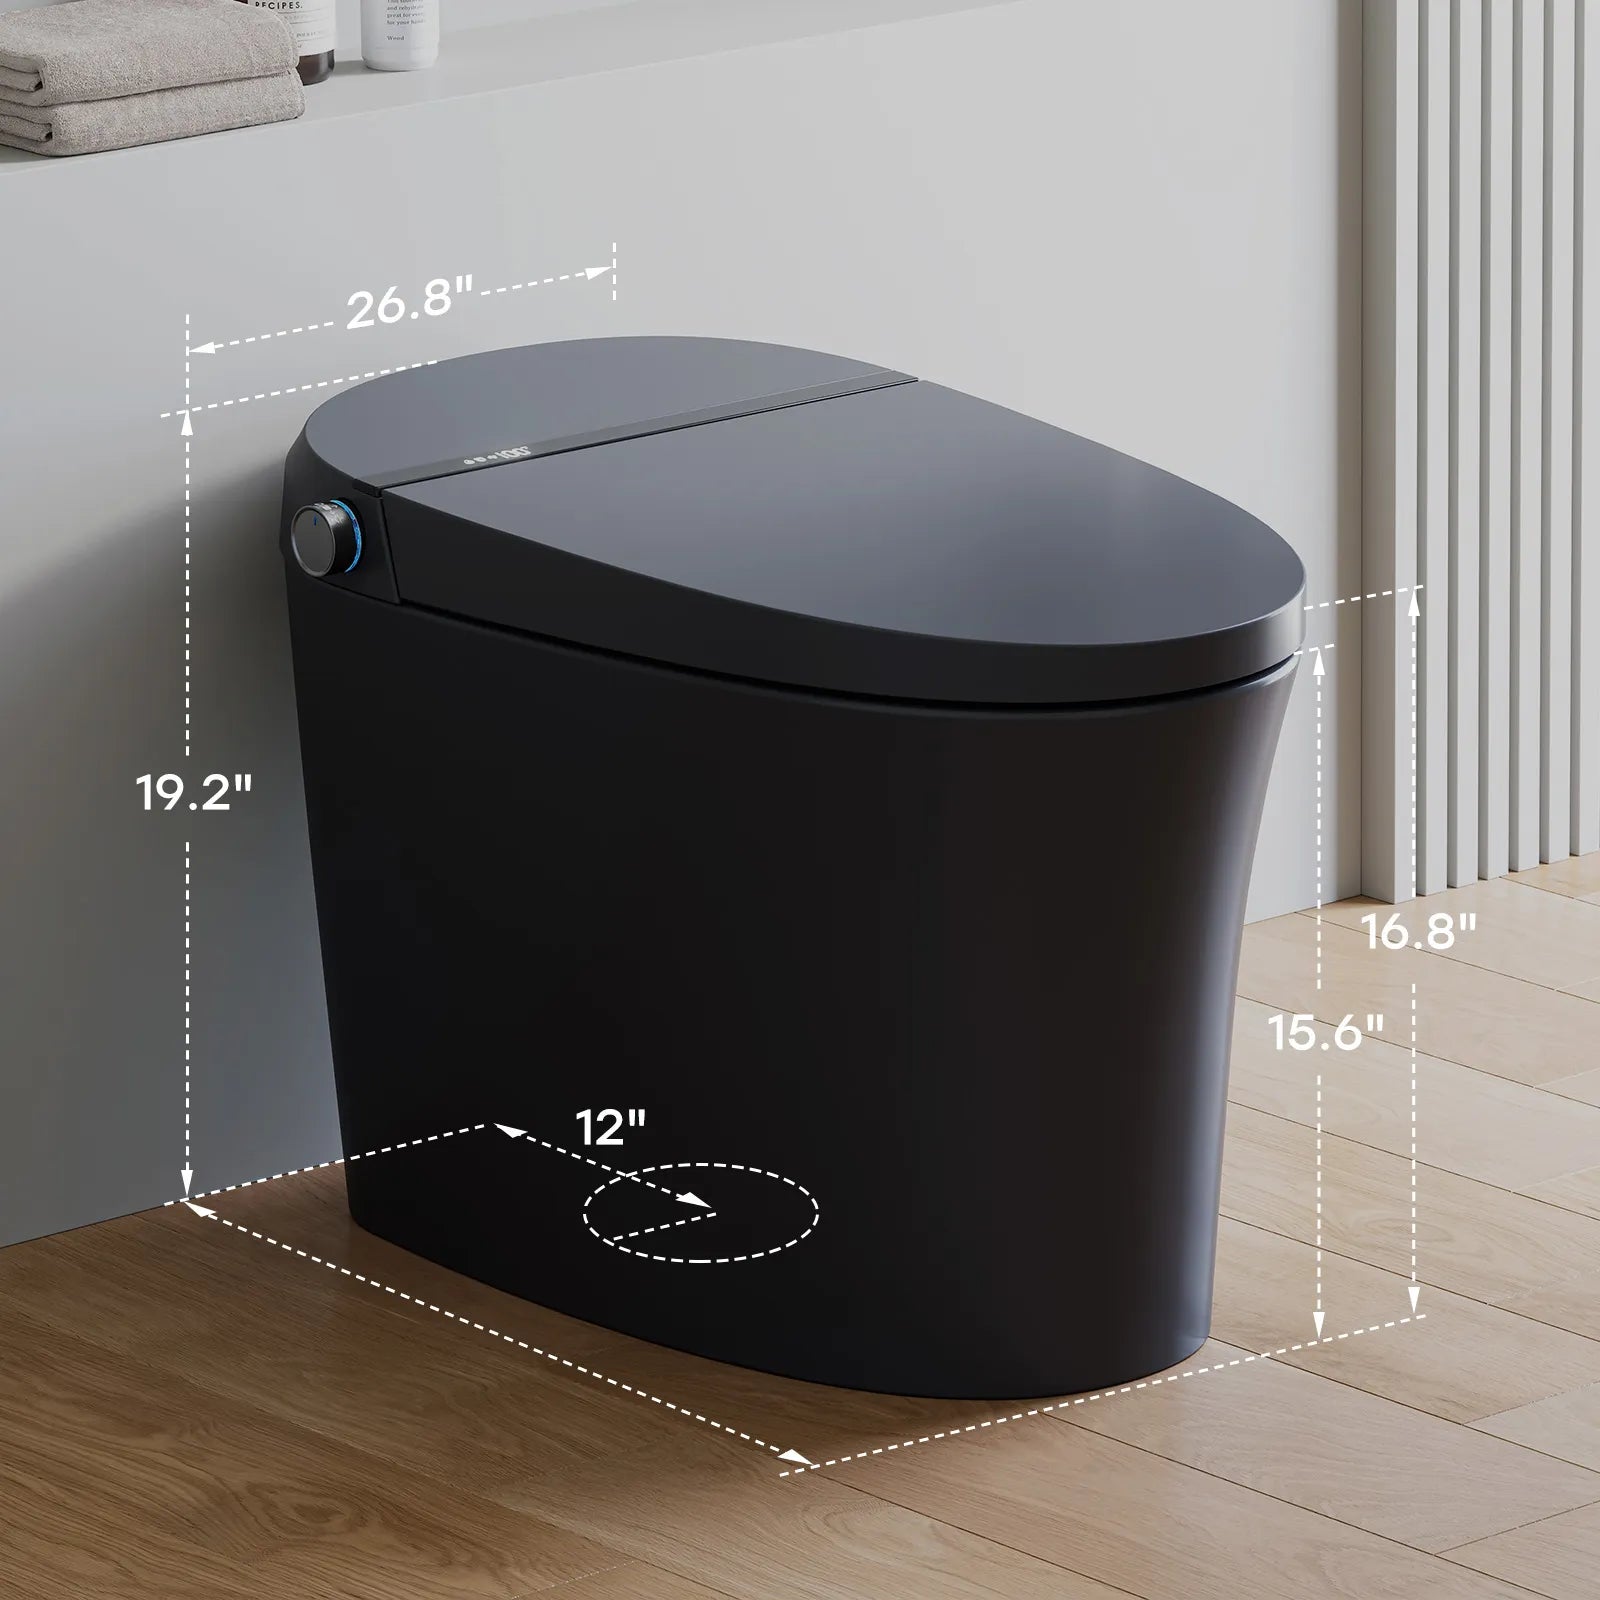 Black Smart Toilet with Bidet Seat For 12 Inch Rough In Model T36